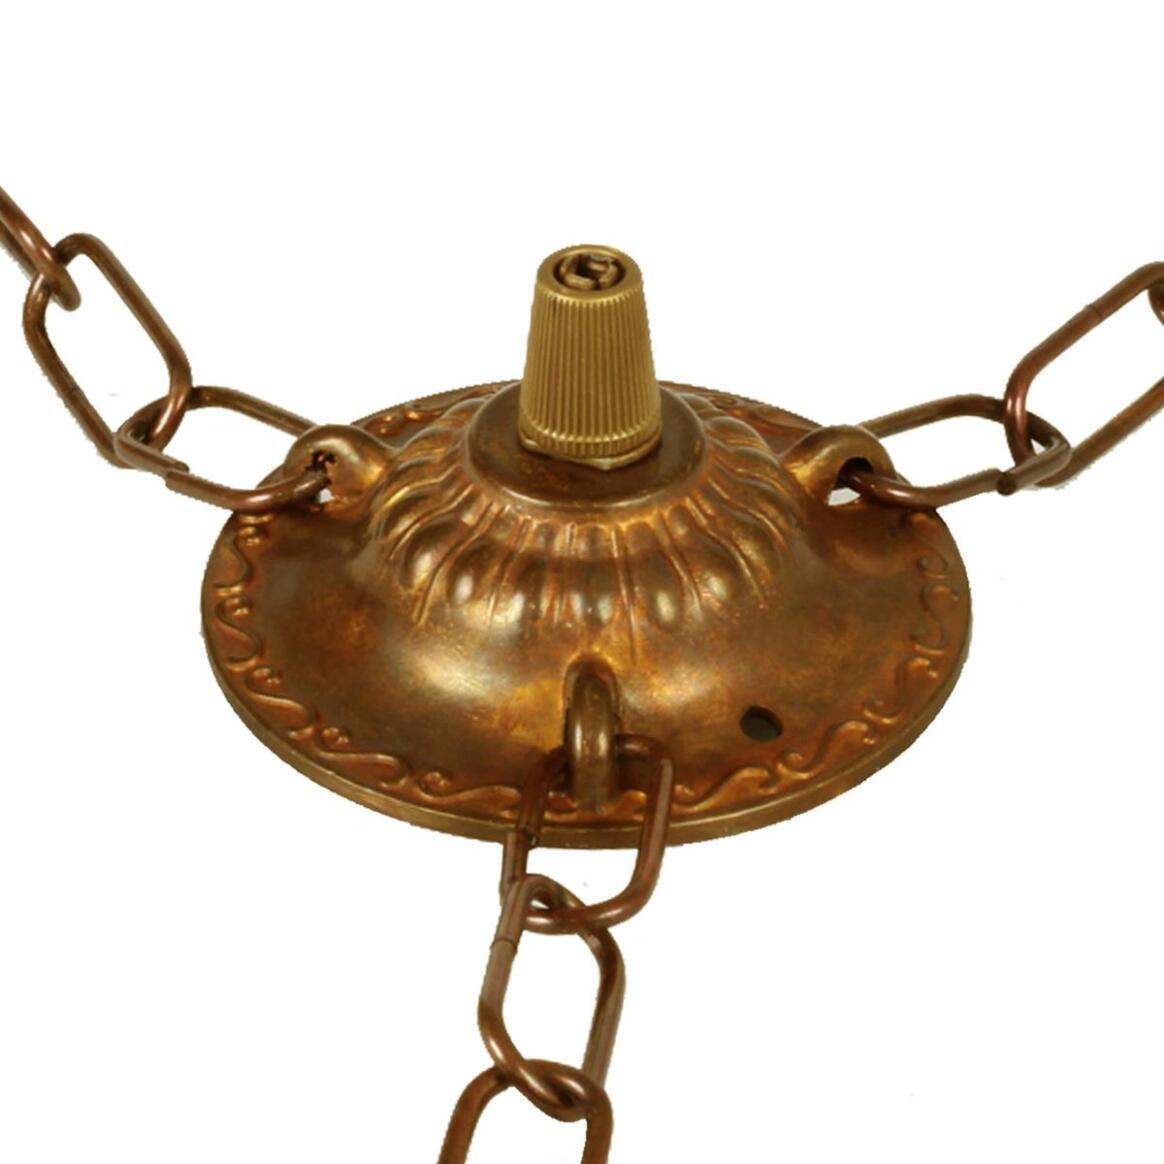 Three-chain decorative antique brass ceiling rose main product image